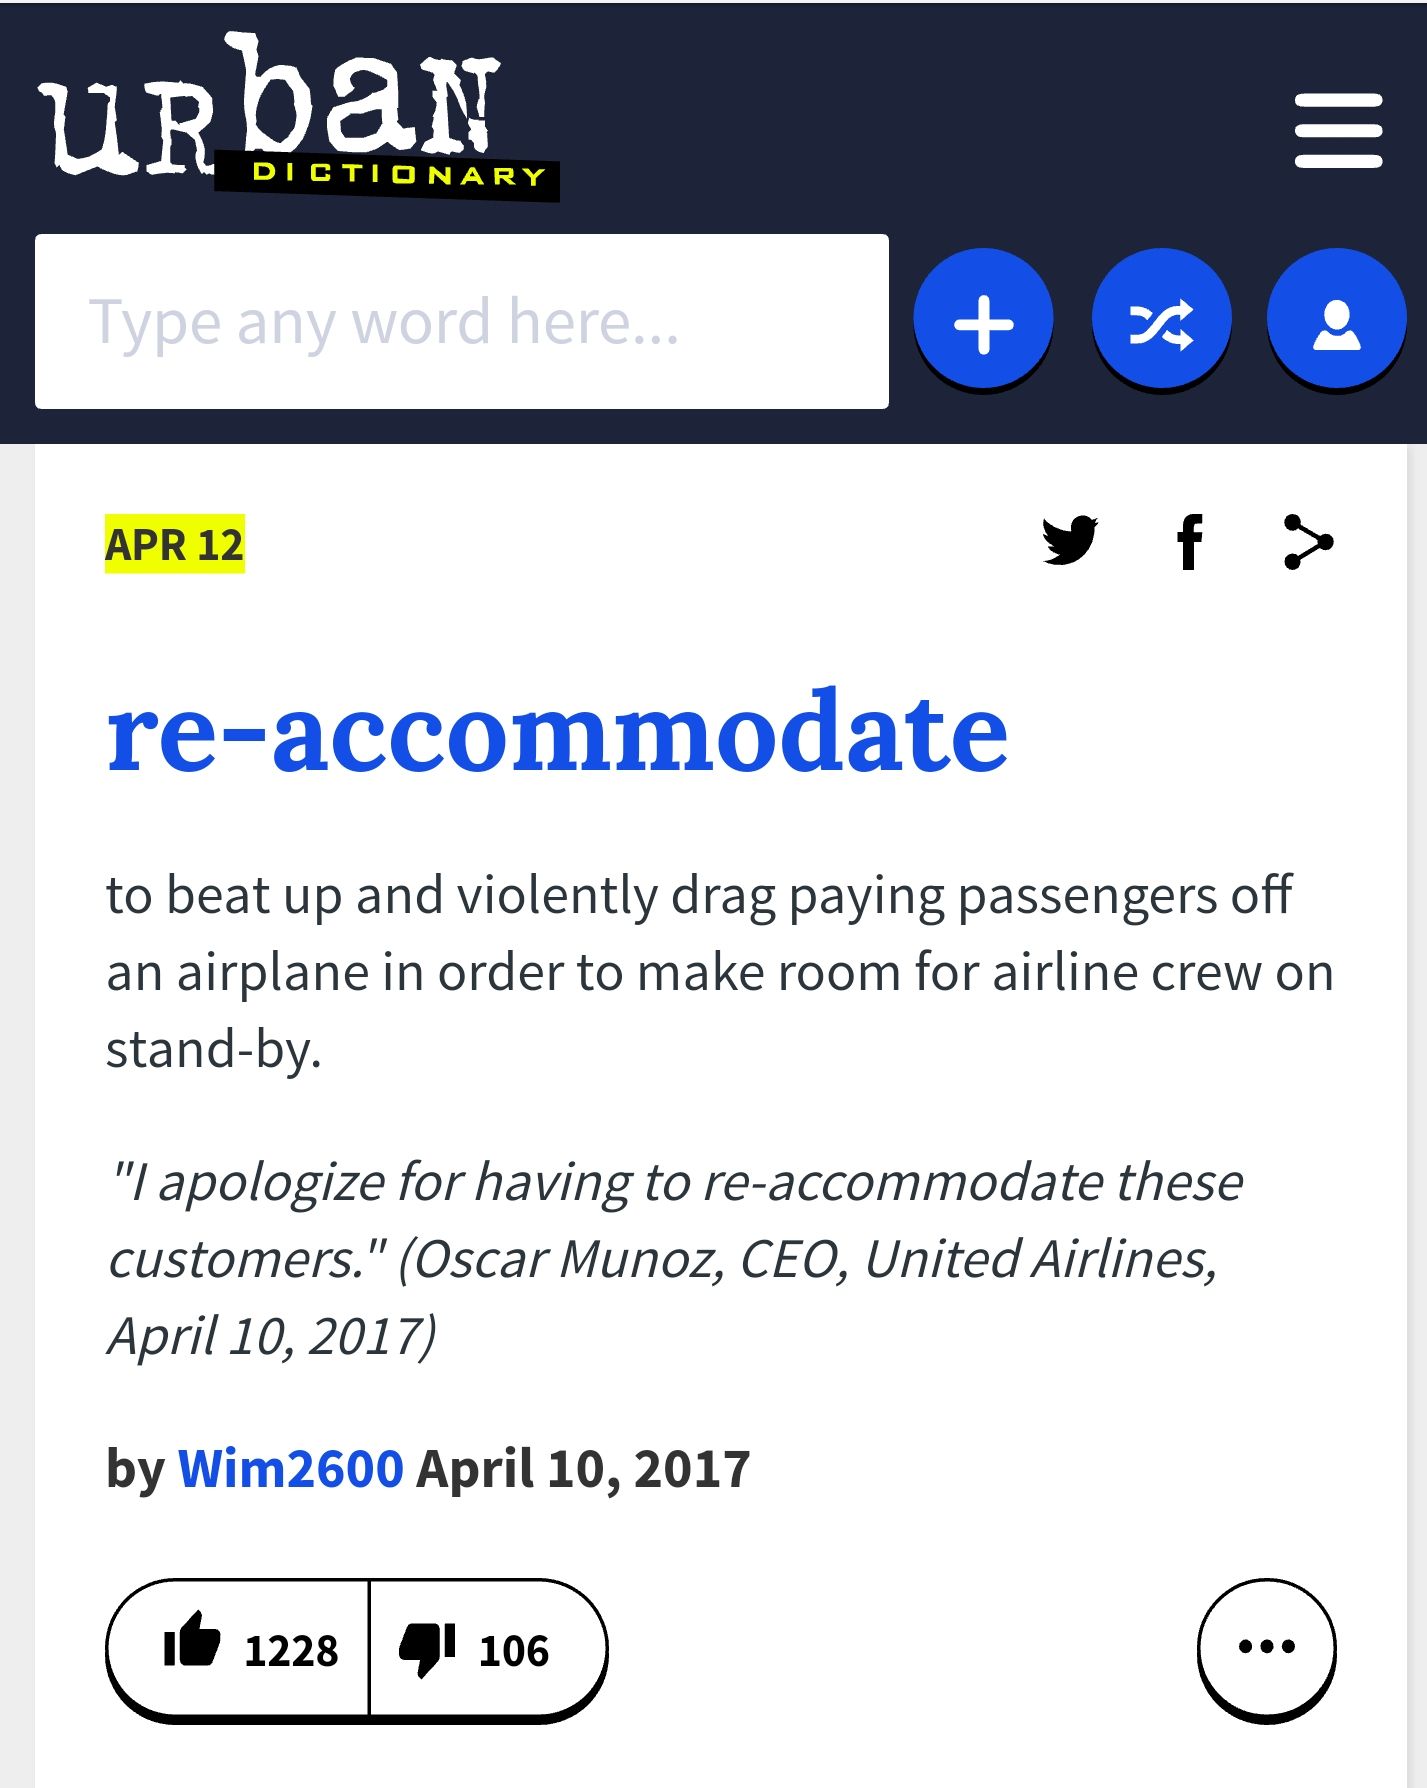 Urban Dictionary Delivers